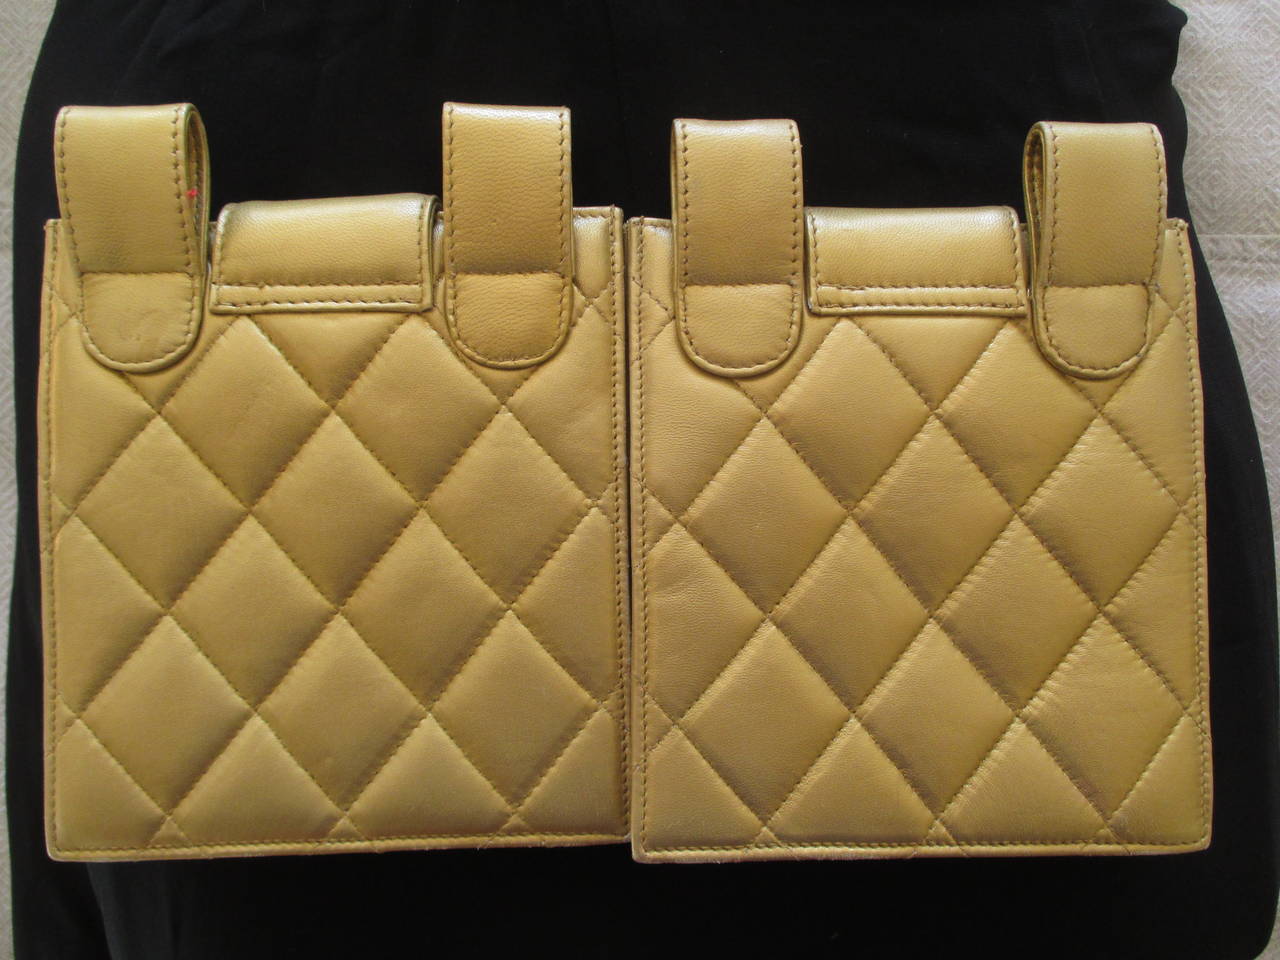 Charming pair of vintage gold leather Chanel bags. Worn on each hip from a belt, like gun holsters of the wild wild west.